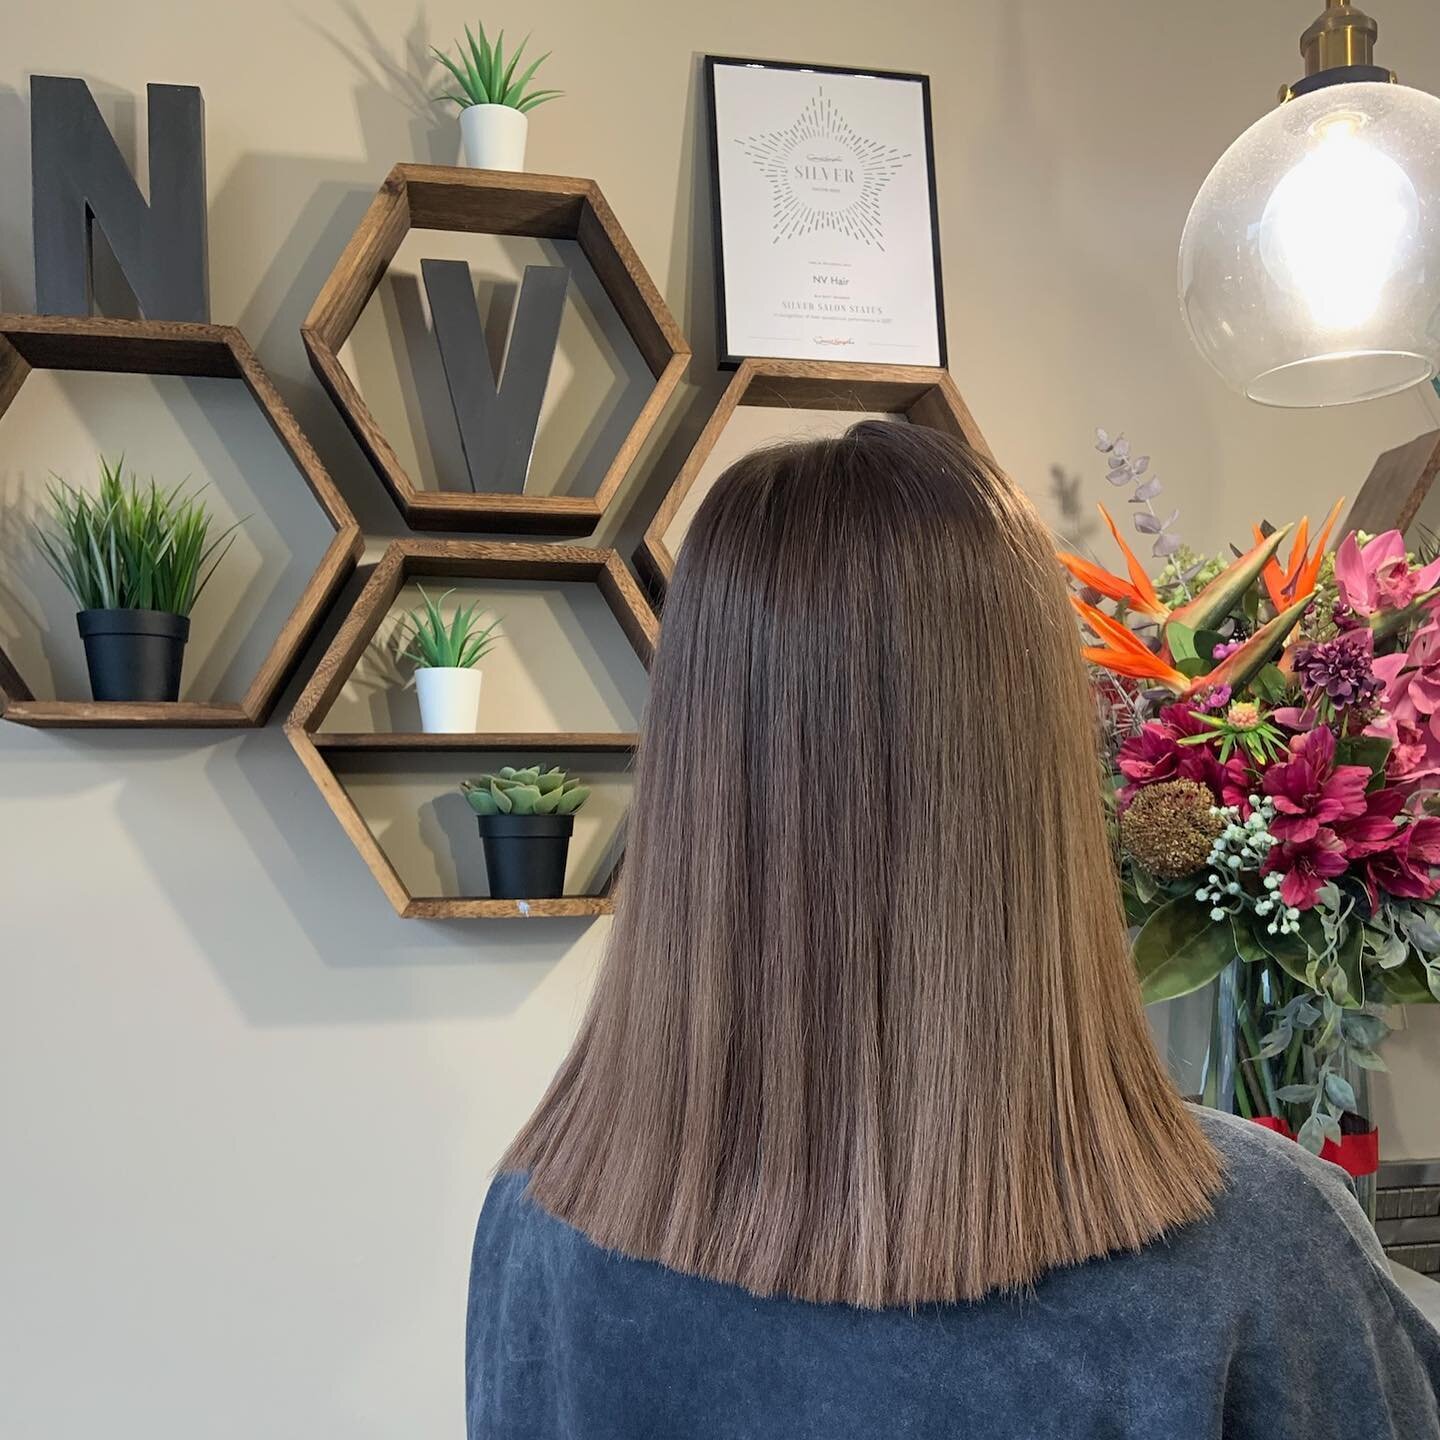 Toner followed by a Cut &amp; Blowdry by our Amazing Armonda 💕 

To book in for a similar service you can use our online booking system or simply give us a call / pop in salon. 

We are open : 
🌸Tuesday - Friday 10am - 6pm
🌸Saturdays 9am- 6pm